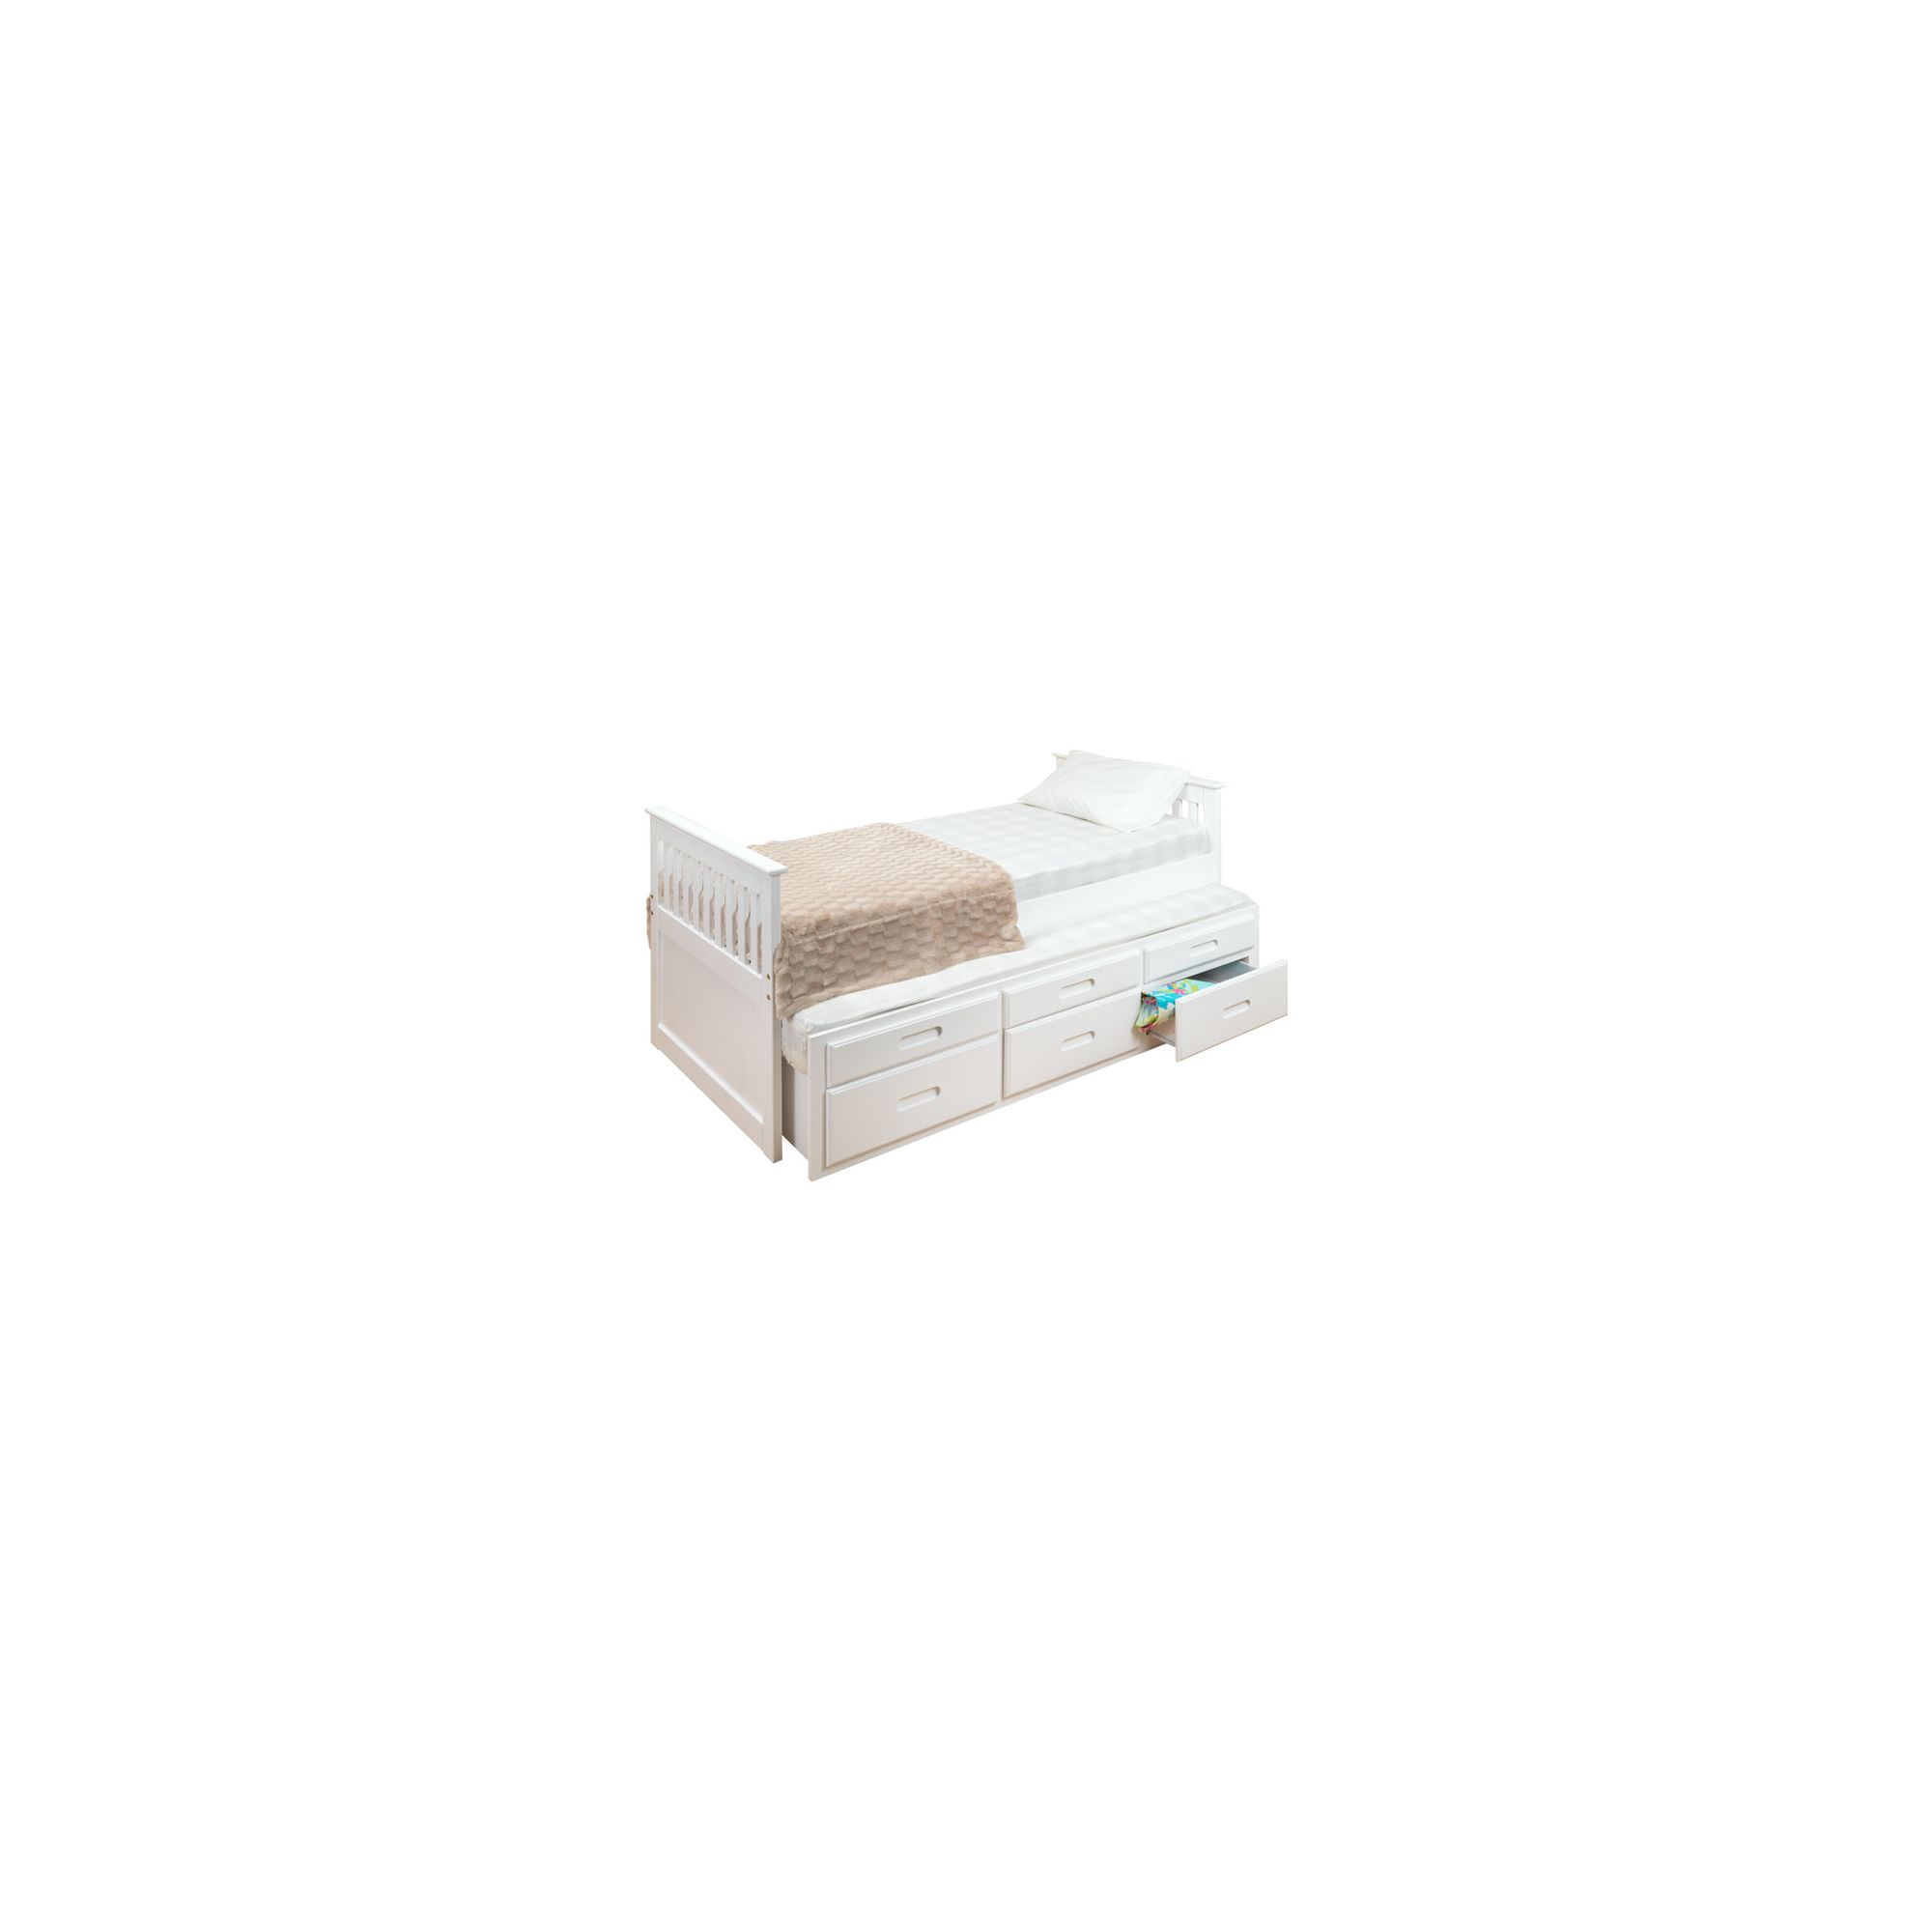 Amani Single Captain Bed with Guest Bed and Drawers - White at Tesco Direct